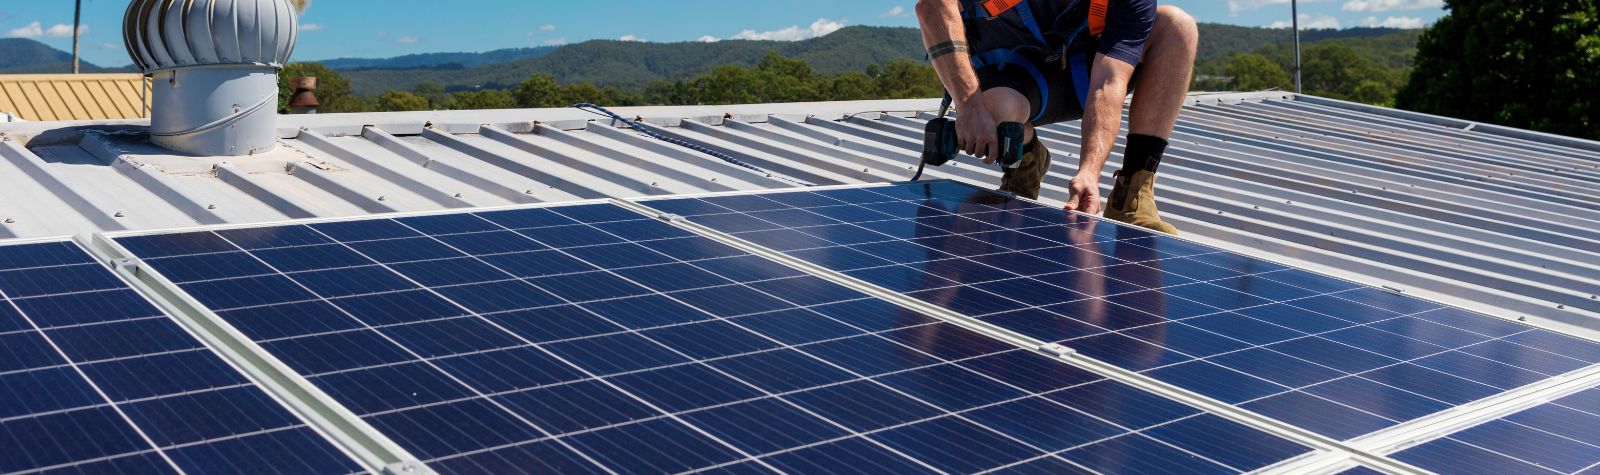 The Benefits of Installing Flat Roof Solar Panels